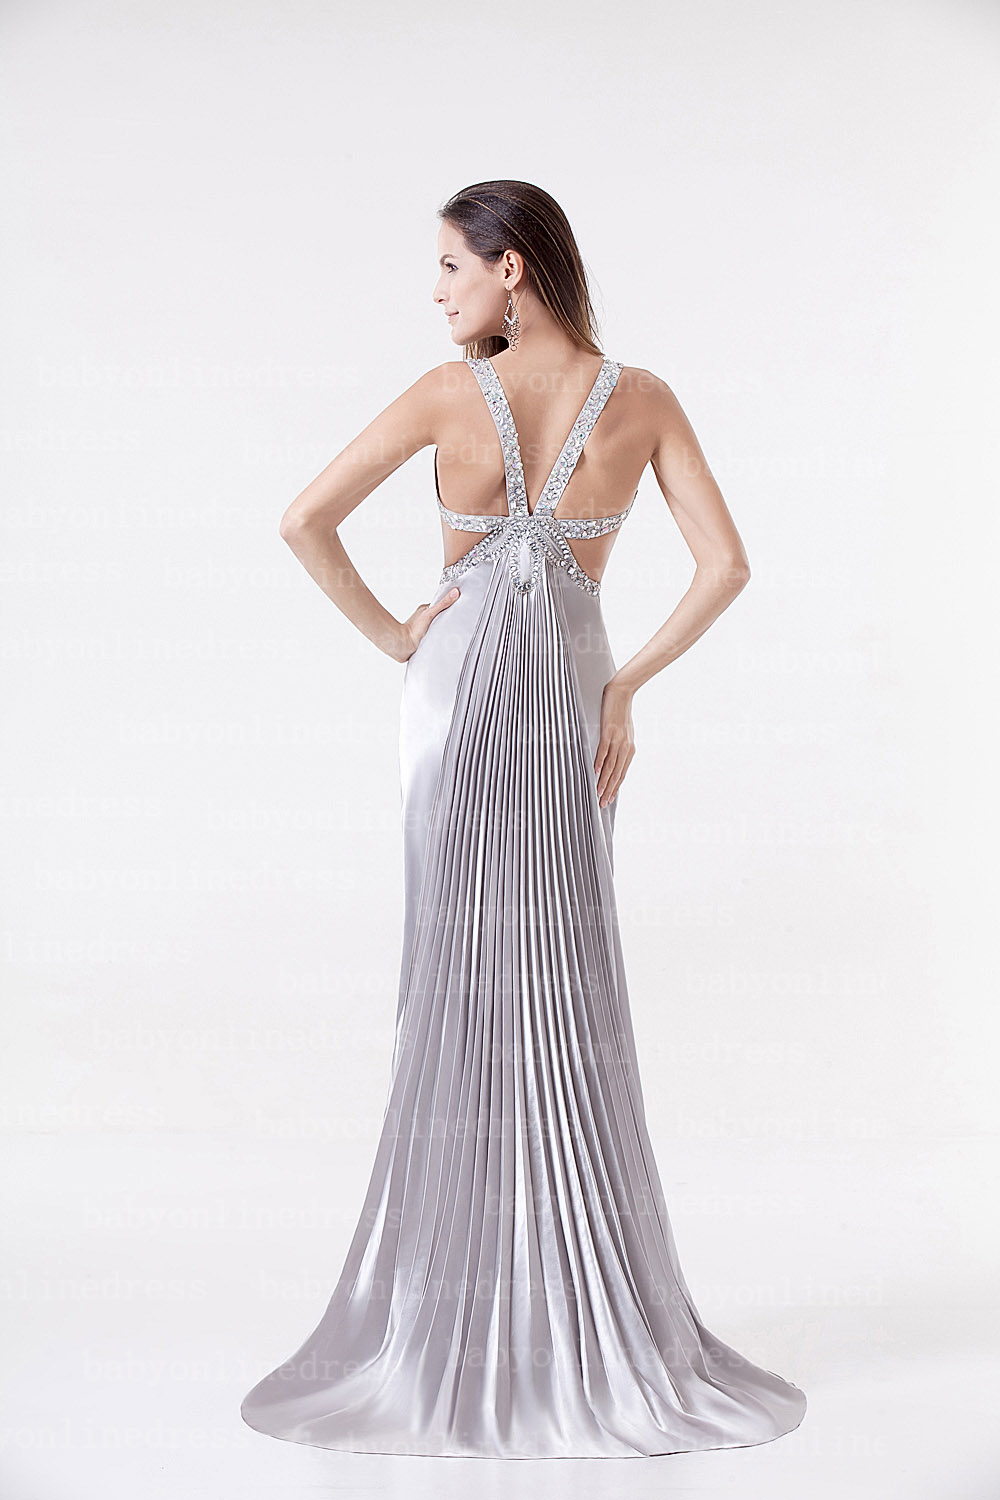 Floor Length Silver Dress - Fashion Show Collection